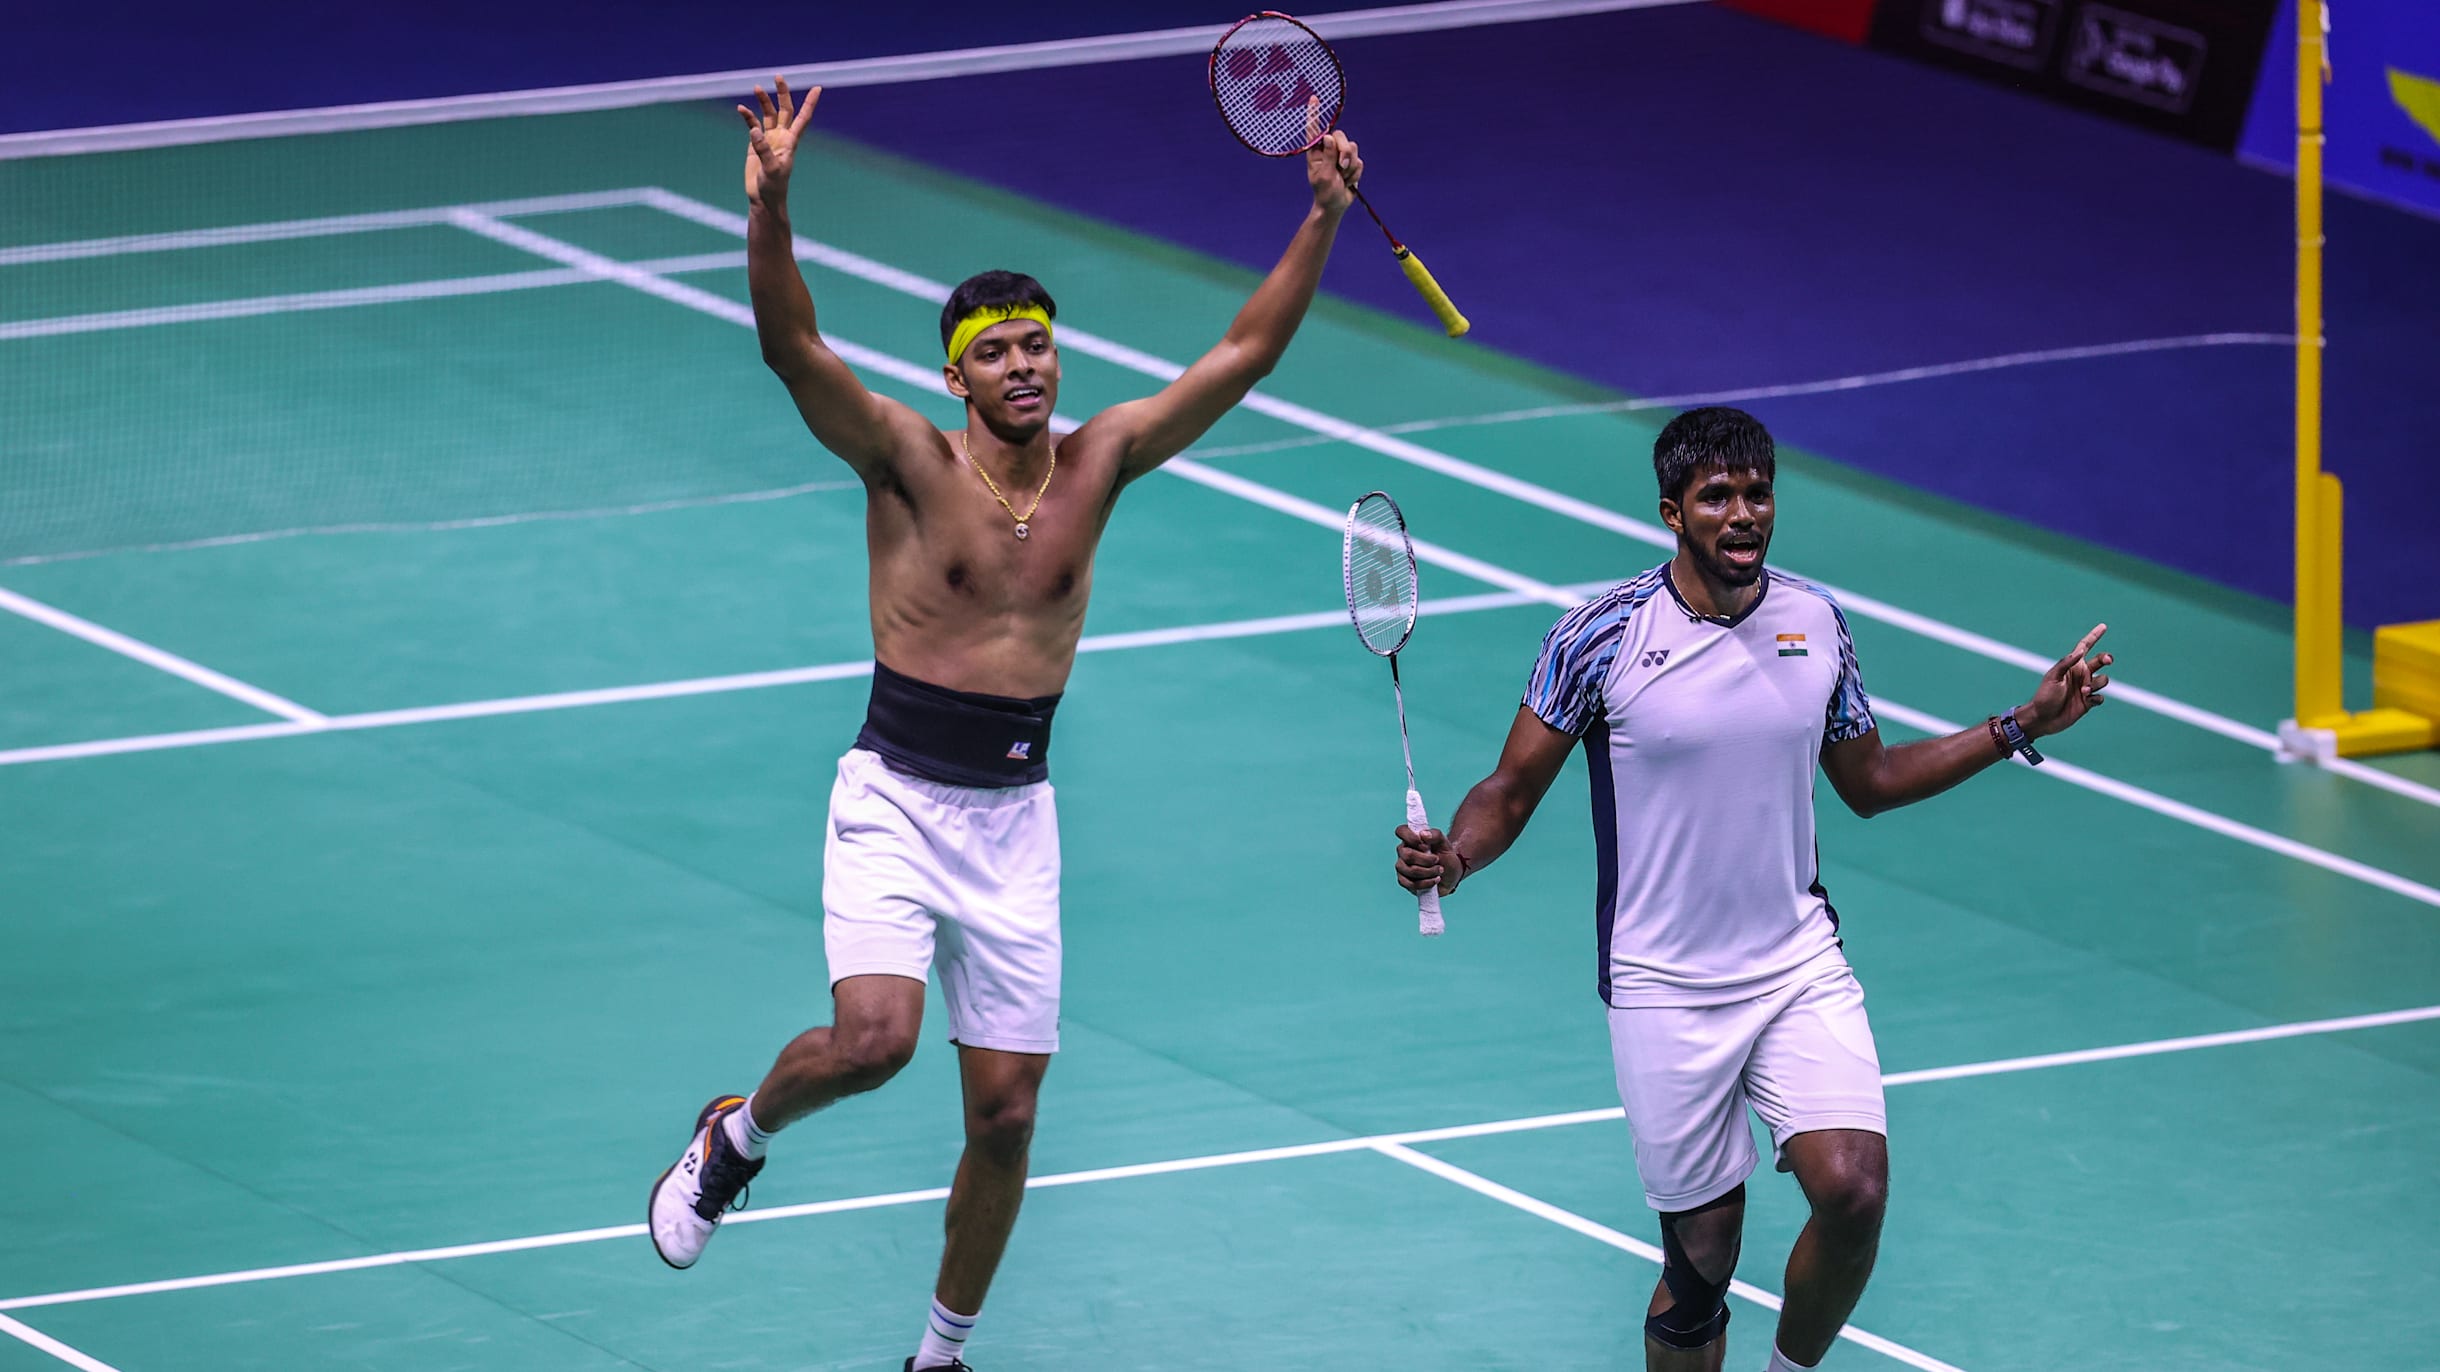 Thomas Cup 2022 badminton Indian men beat Indonesia in final to win maiden title